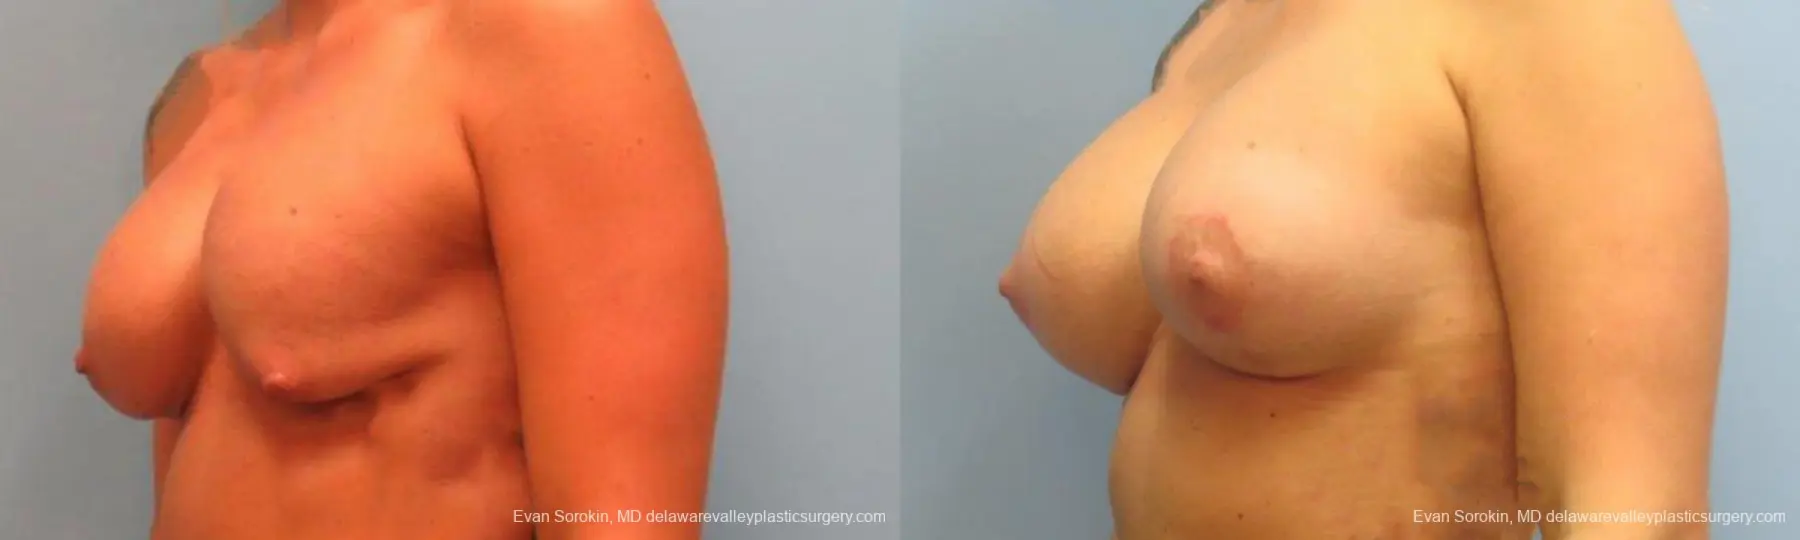 Philadelphia Breast Lift and Augmentation 9370 - Before and After 2